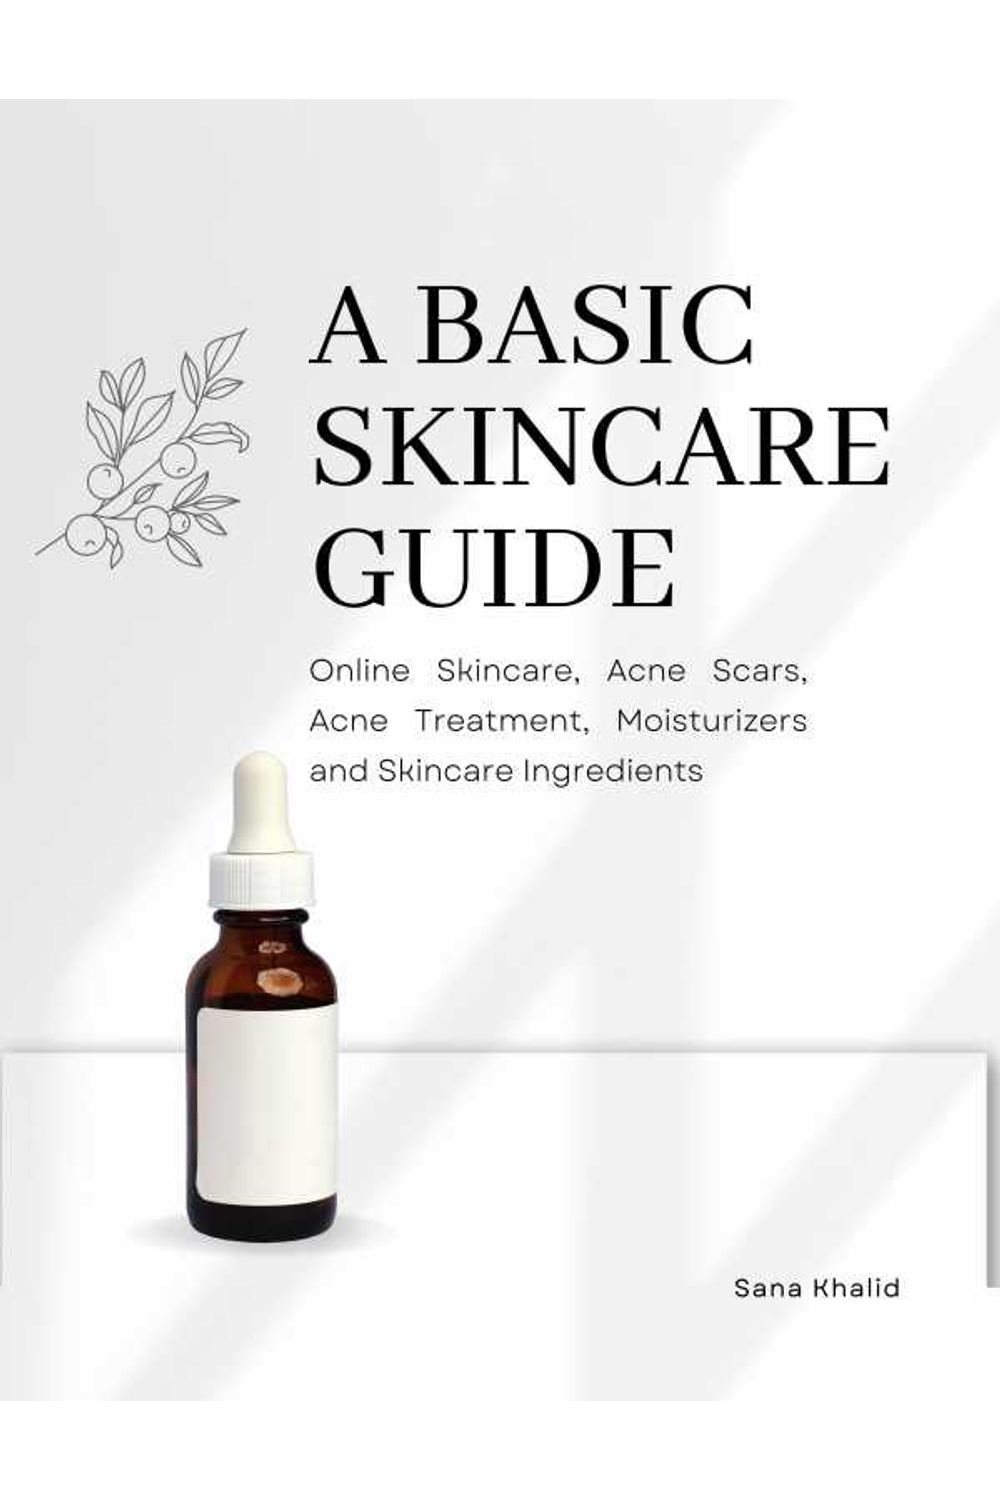 bw-a-basic-skincare-guide-online-skincare-acne-scars-acne-treatment-moisturizers-and-skincare-ingredients-decipher-science-9783986471729